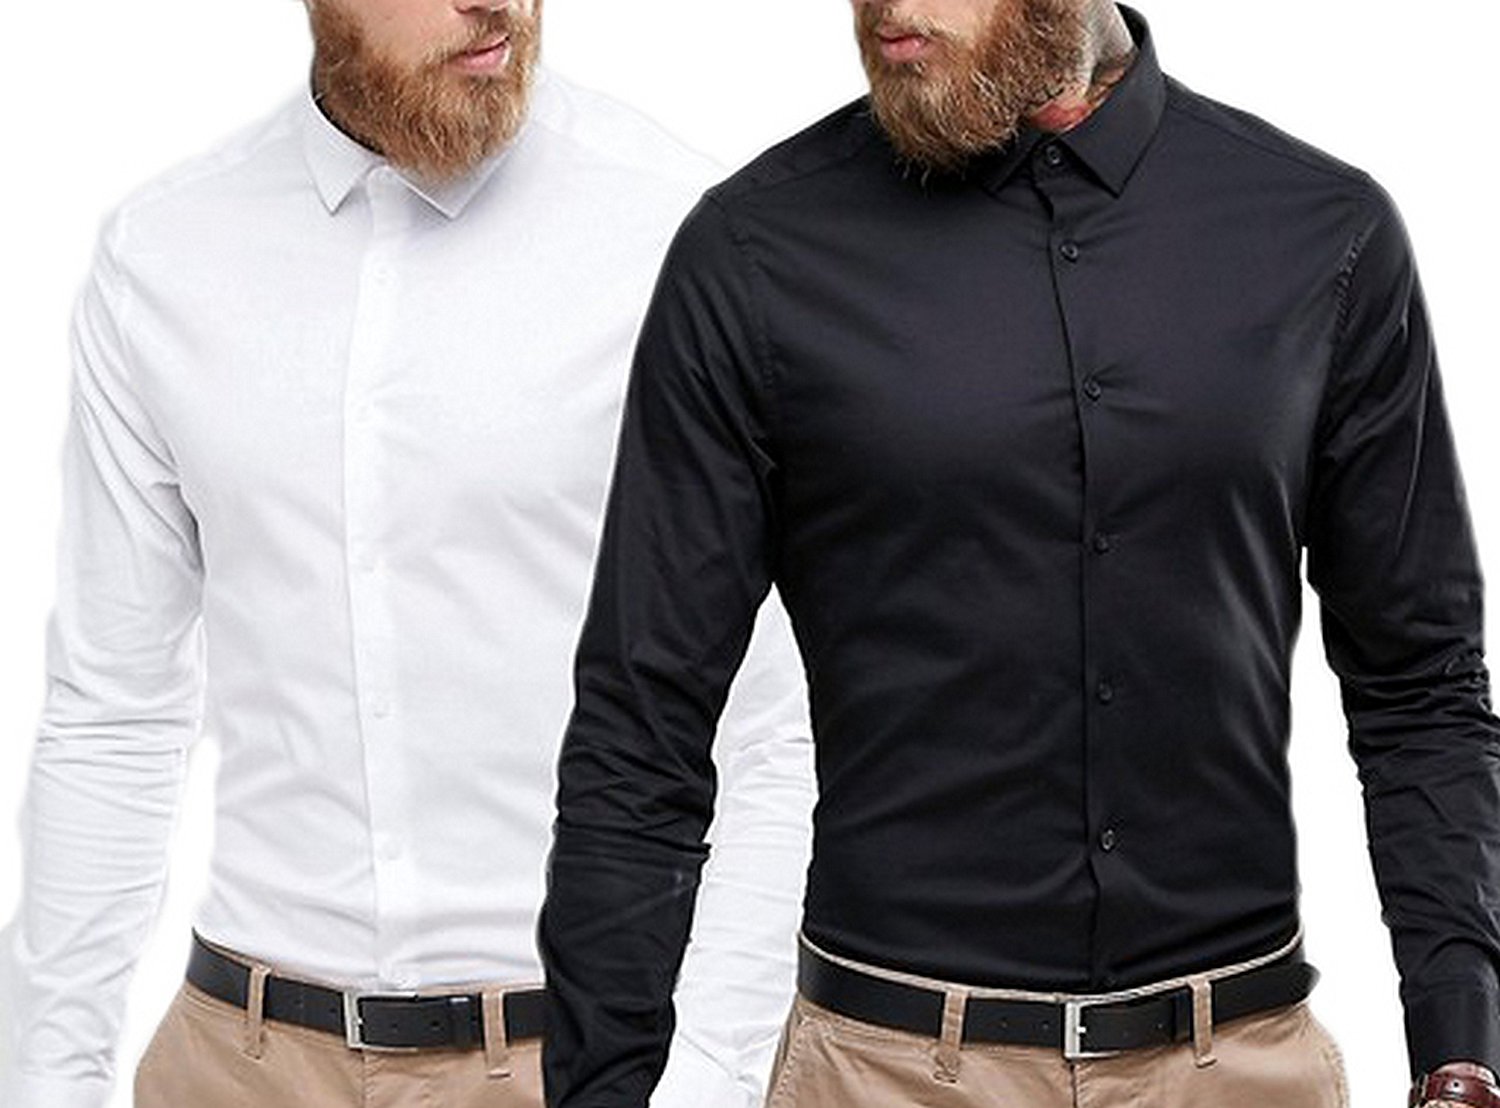 Essential Formal Shirt For Men's Combo Pack of 2 - White and Black
